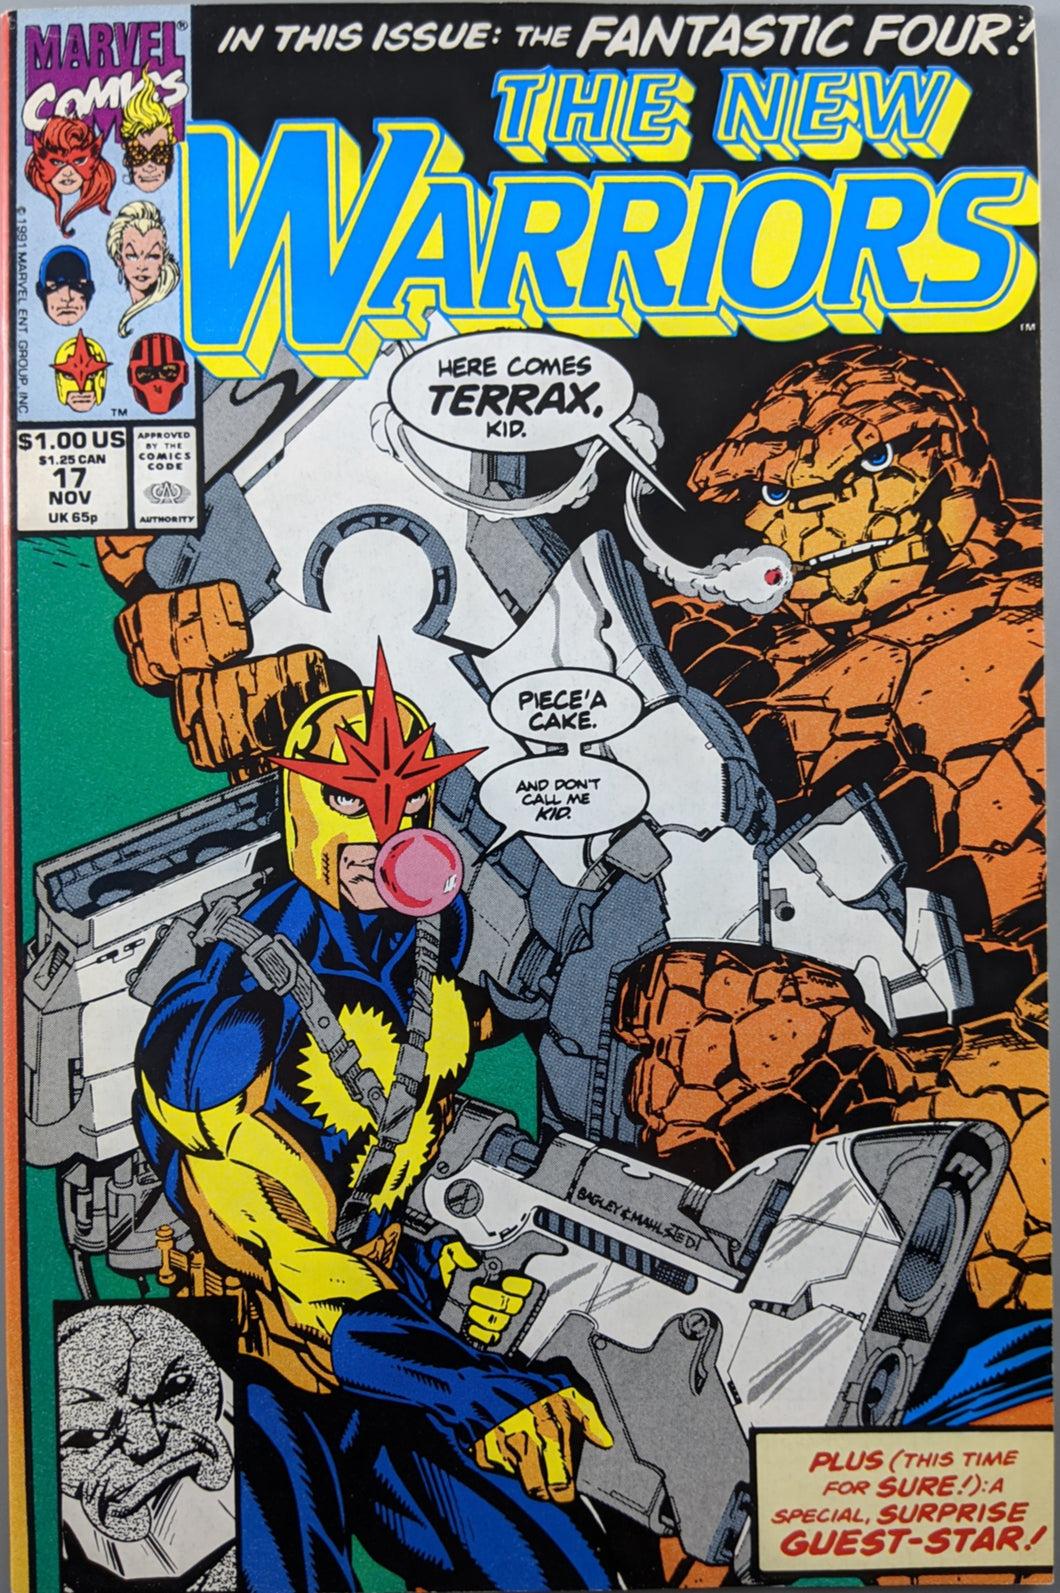 New Warriors, The (1990) #17